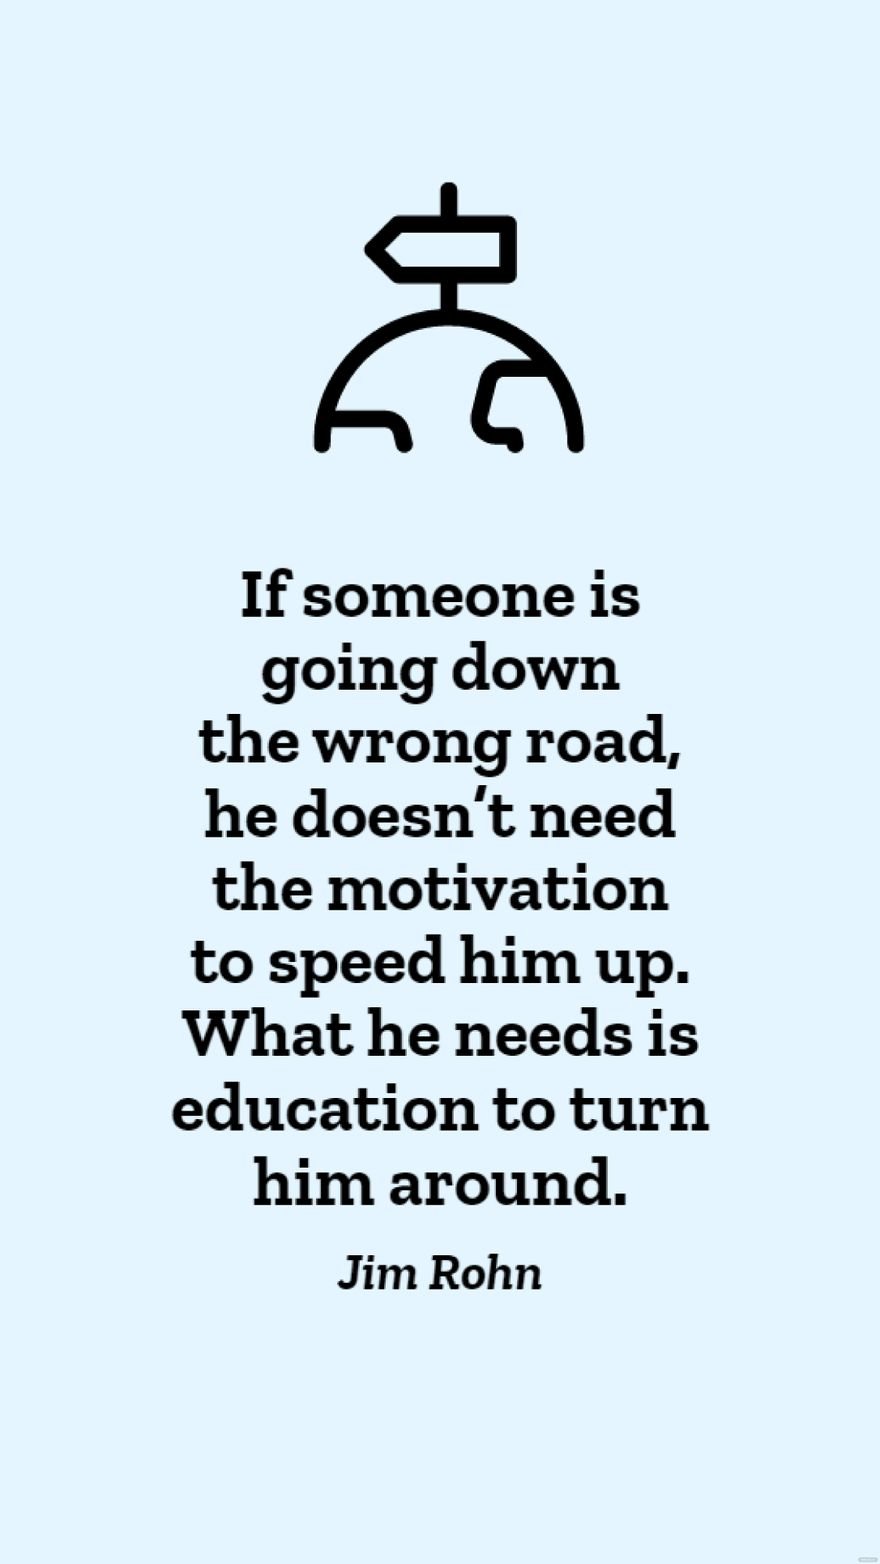 Jim Rohn - If someone is going down the wrong road, he doesn’t need the motivation to speed him up. What he needs is education to turn him around.